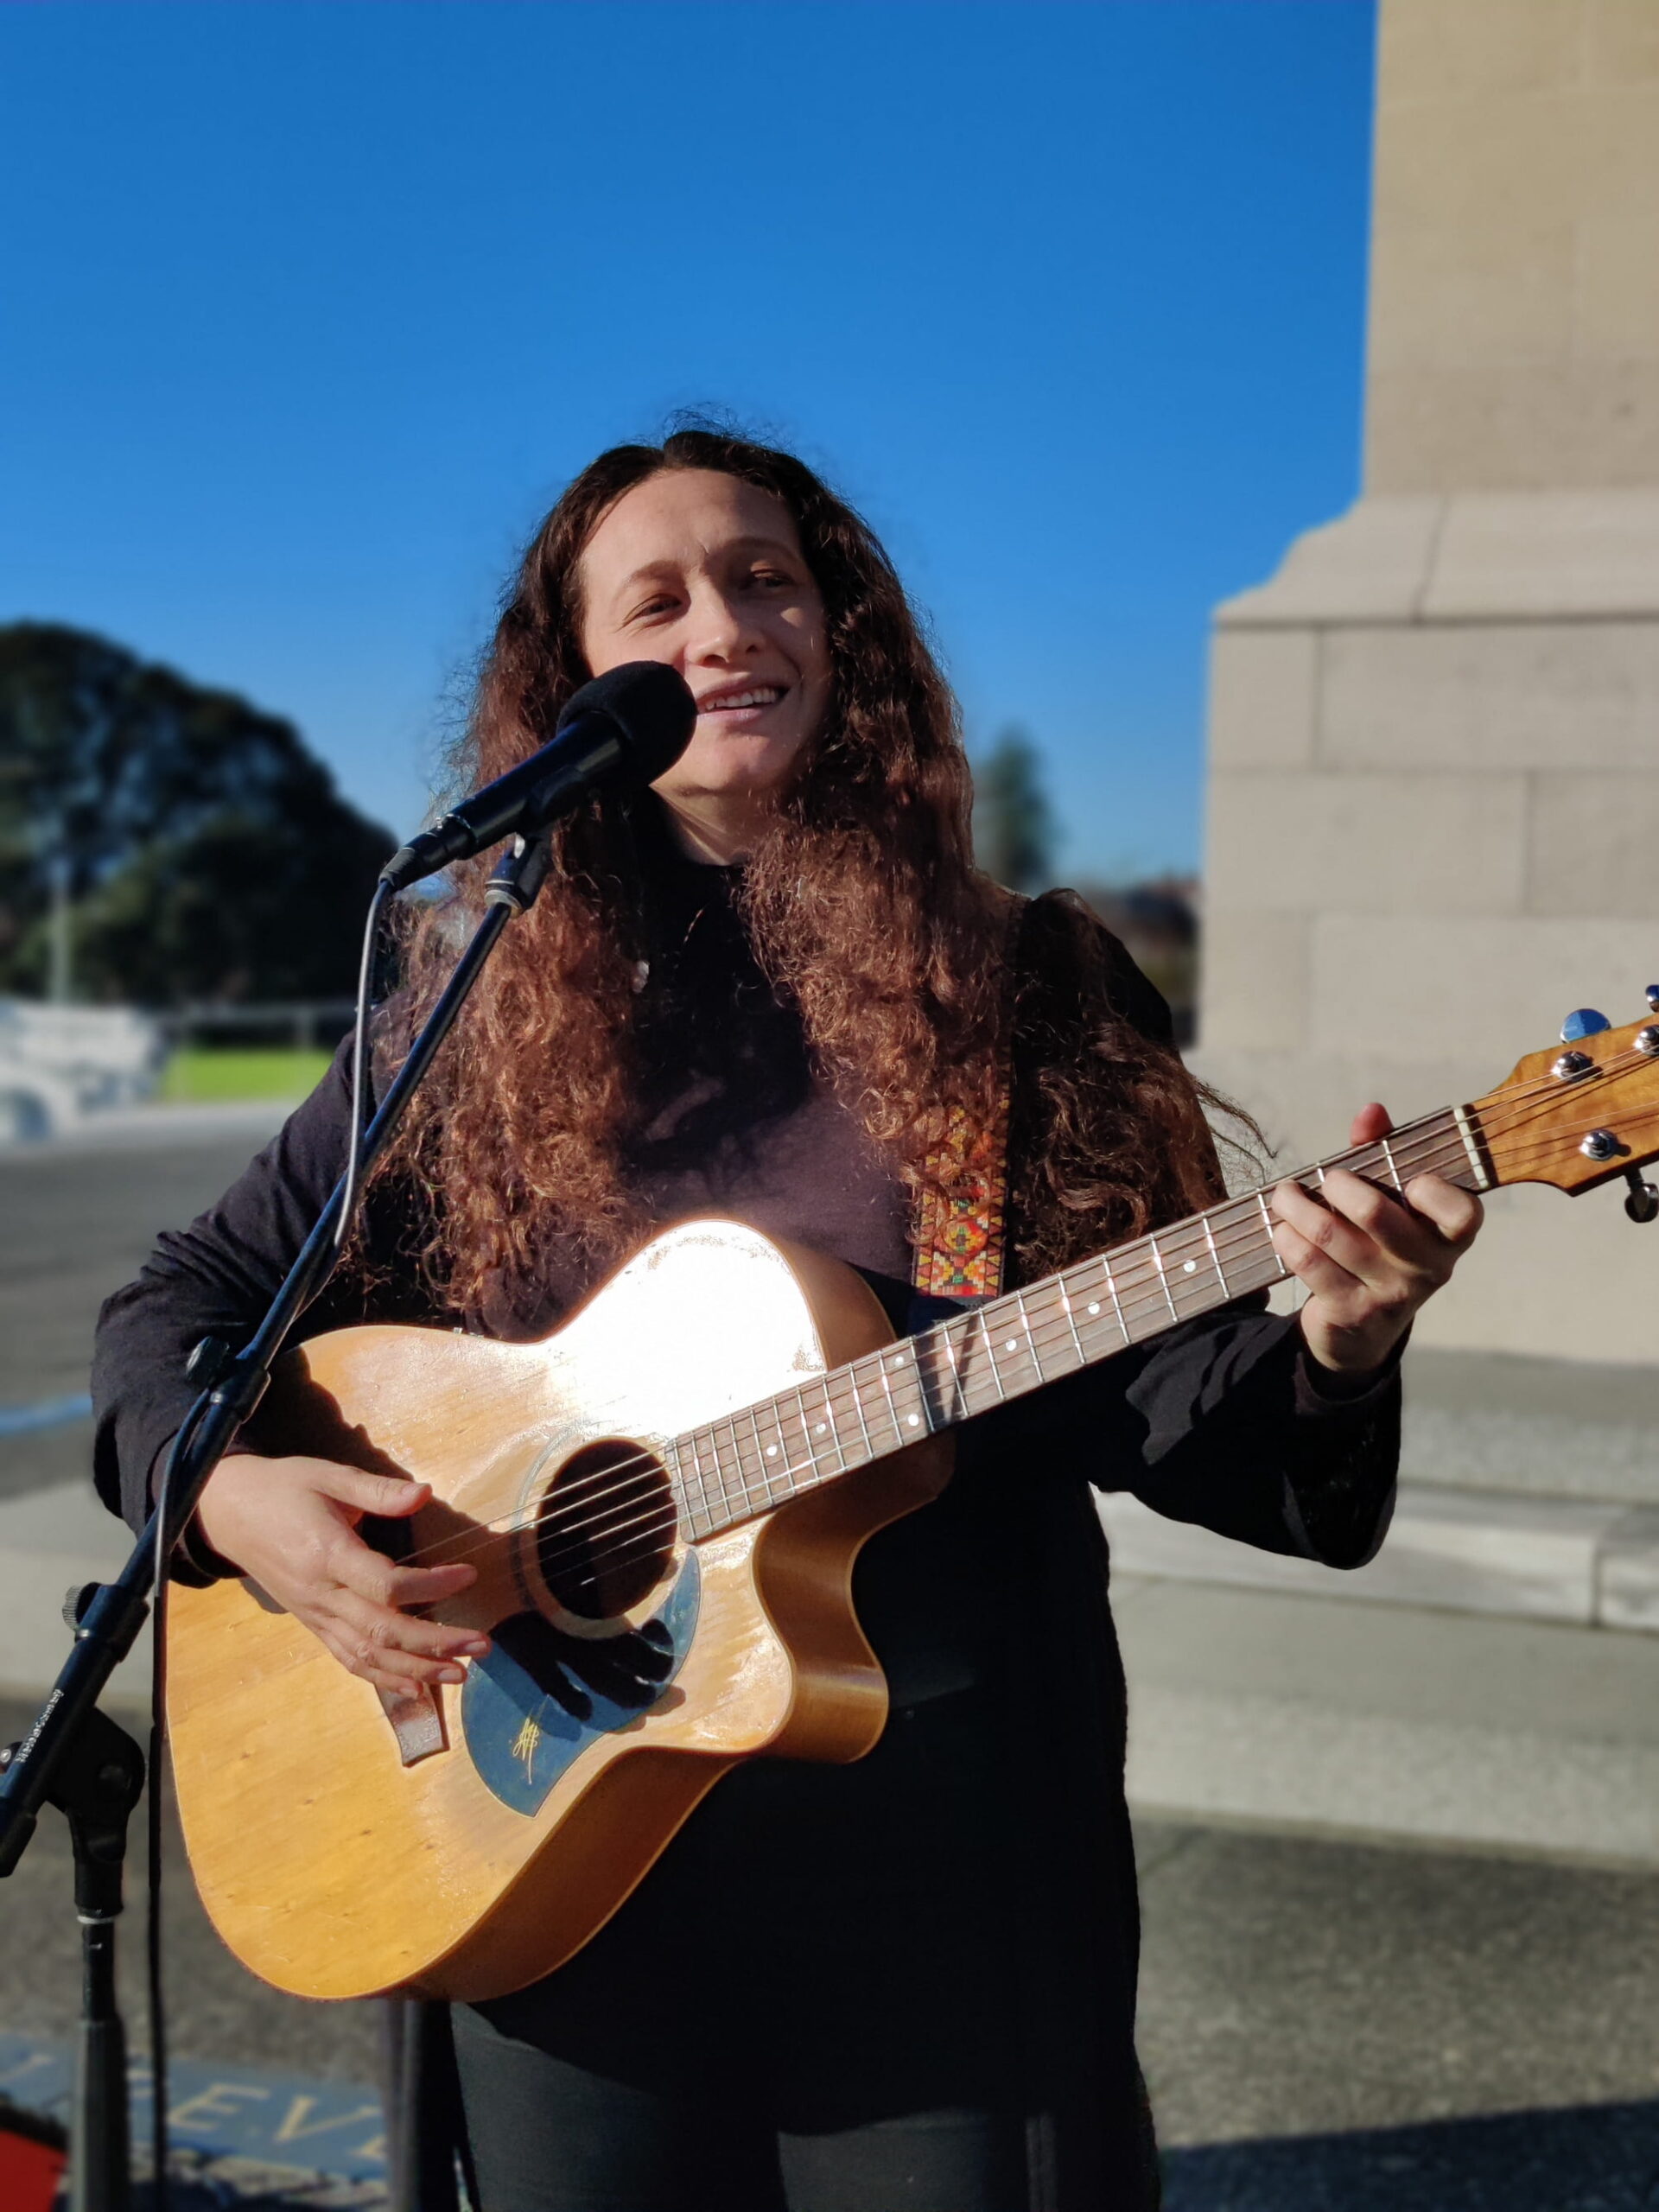 A singer with long curly hair plays a guitar and sings into a microphone in front of a cenotaph